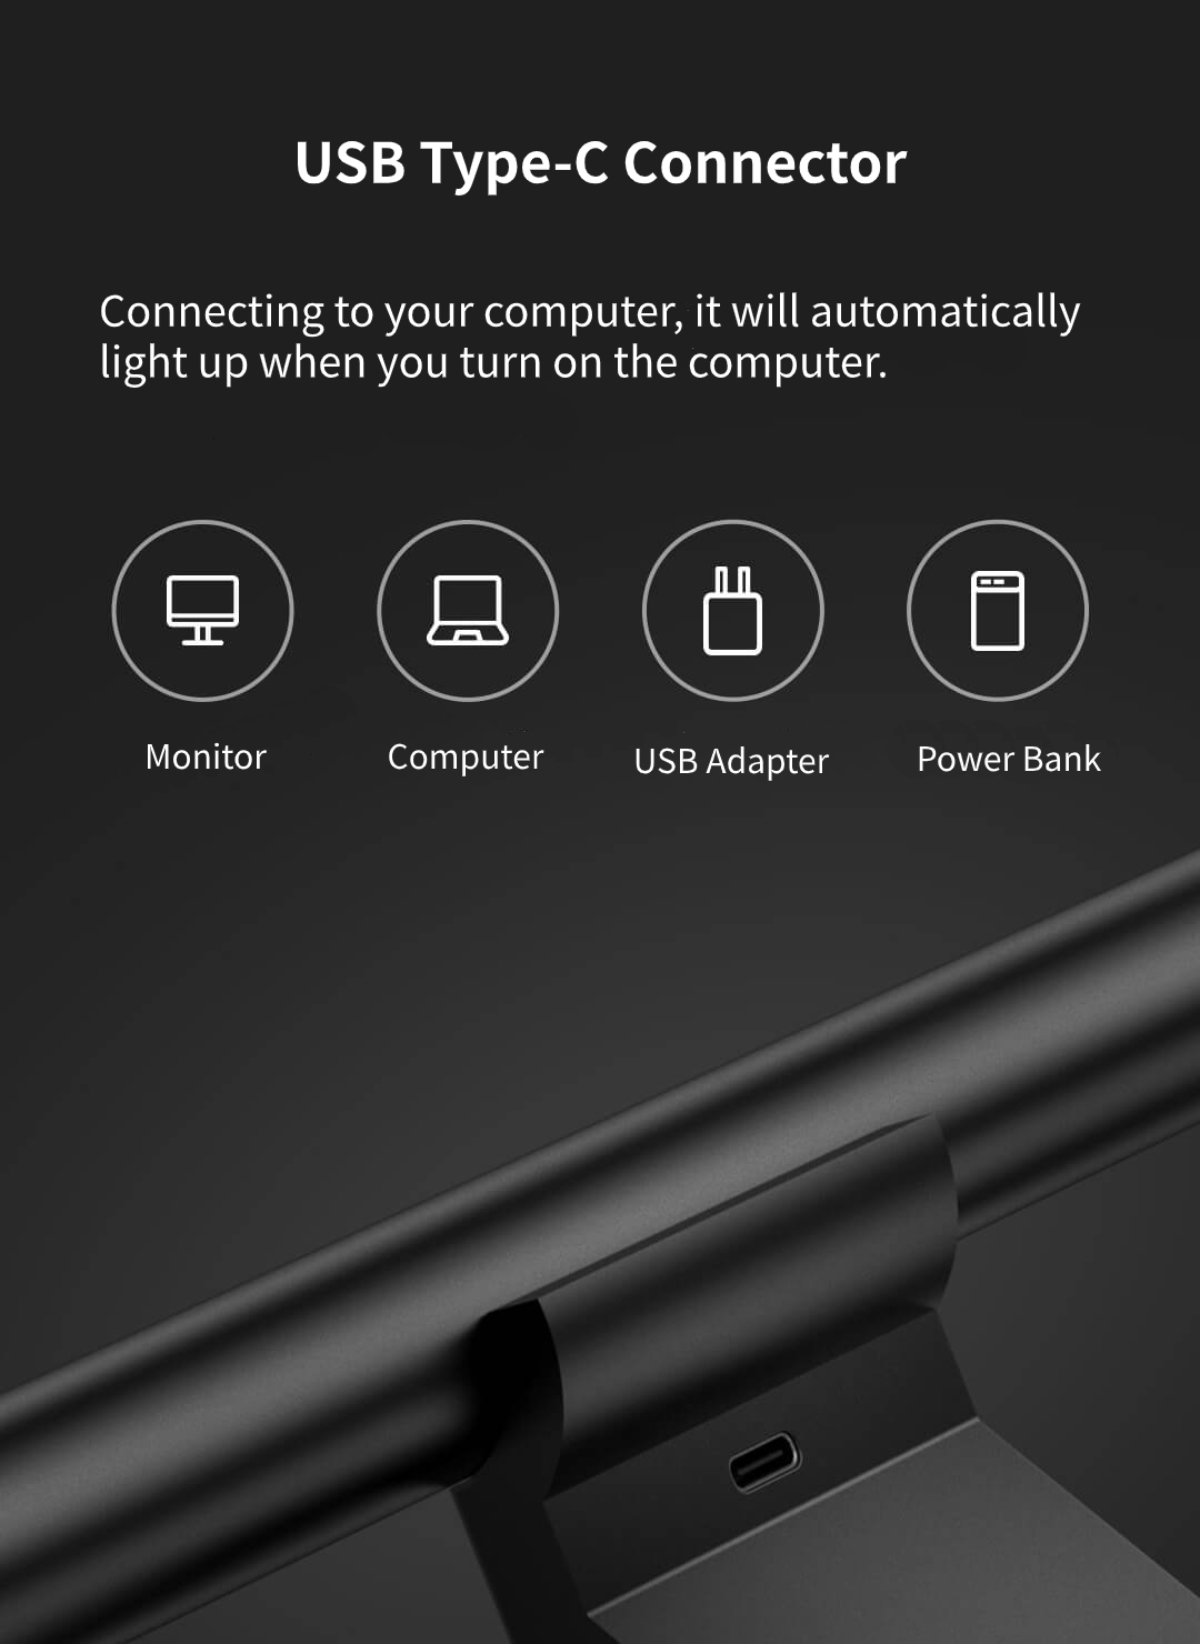 XIAOMI Mi Computer Monitor Light Bar 2.4GHz wireless Remote Control No Screen Reflection Eyes Protection Ra95 USB Lamp Display Hanging Light